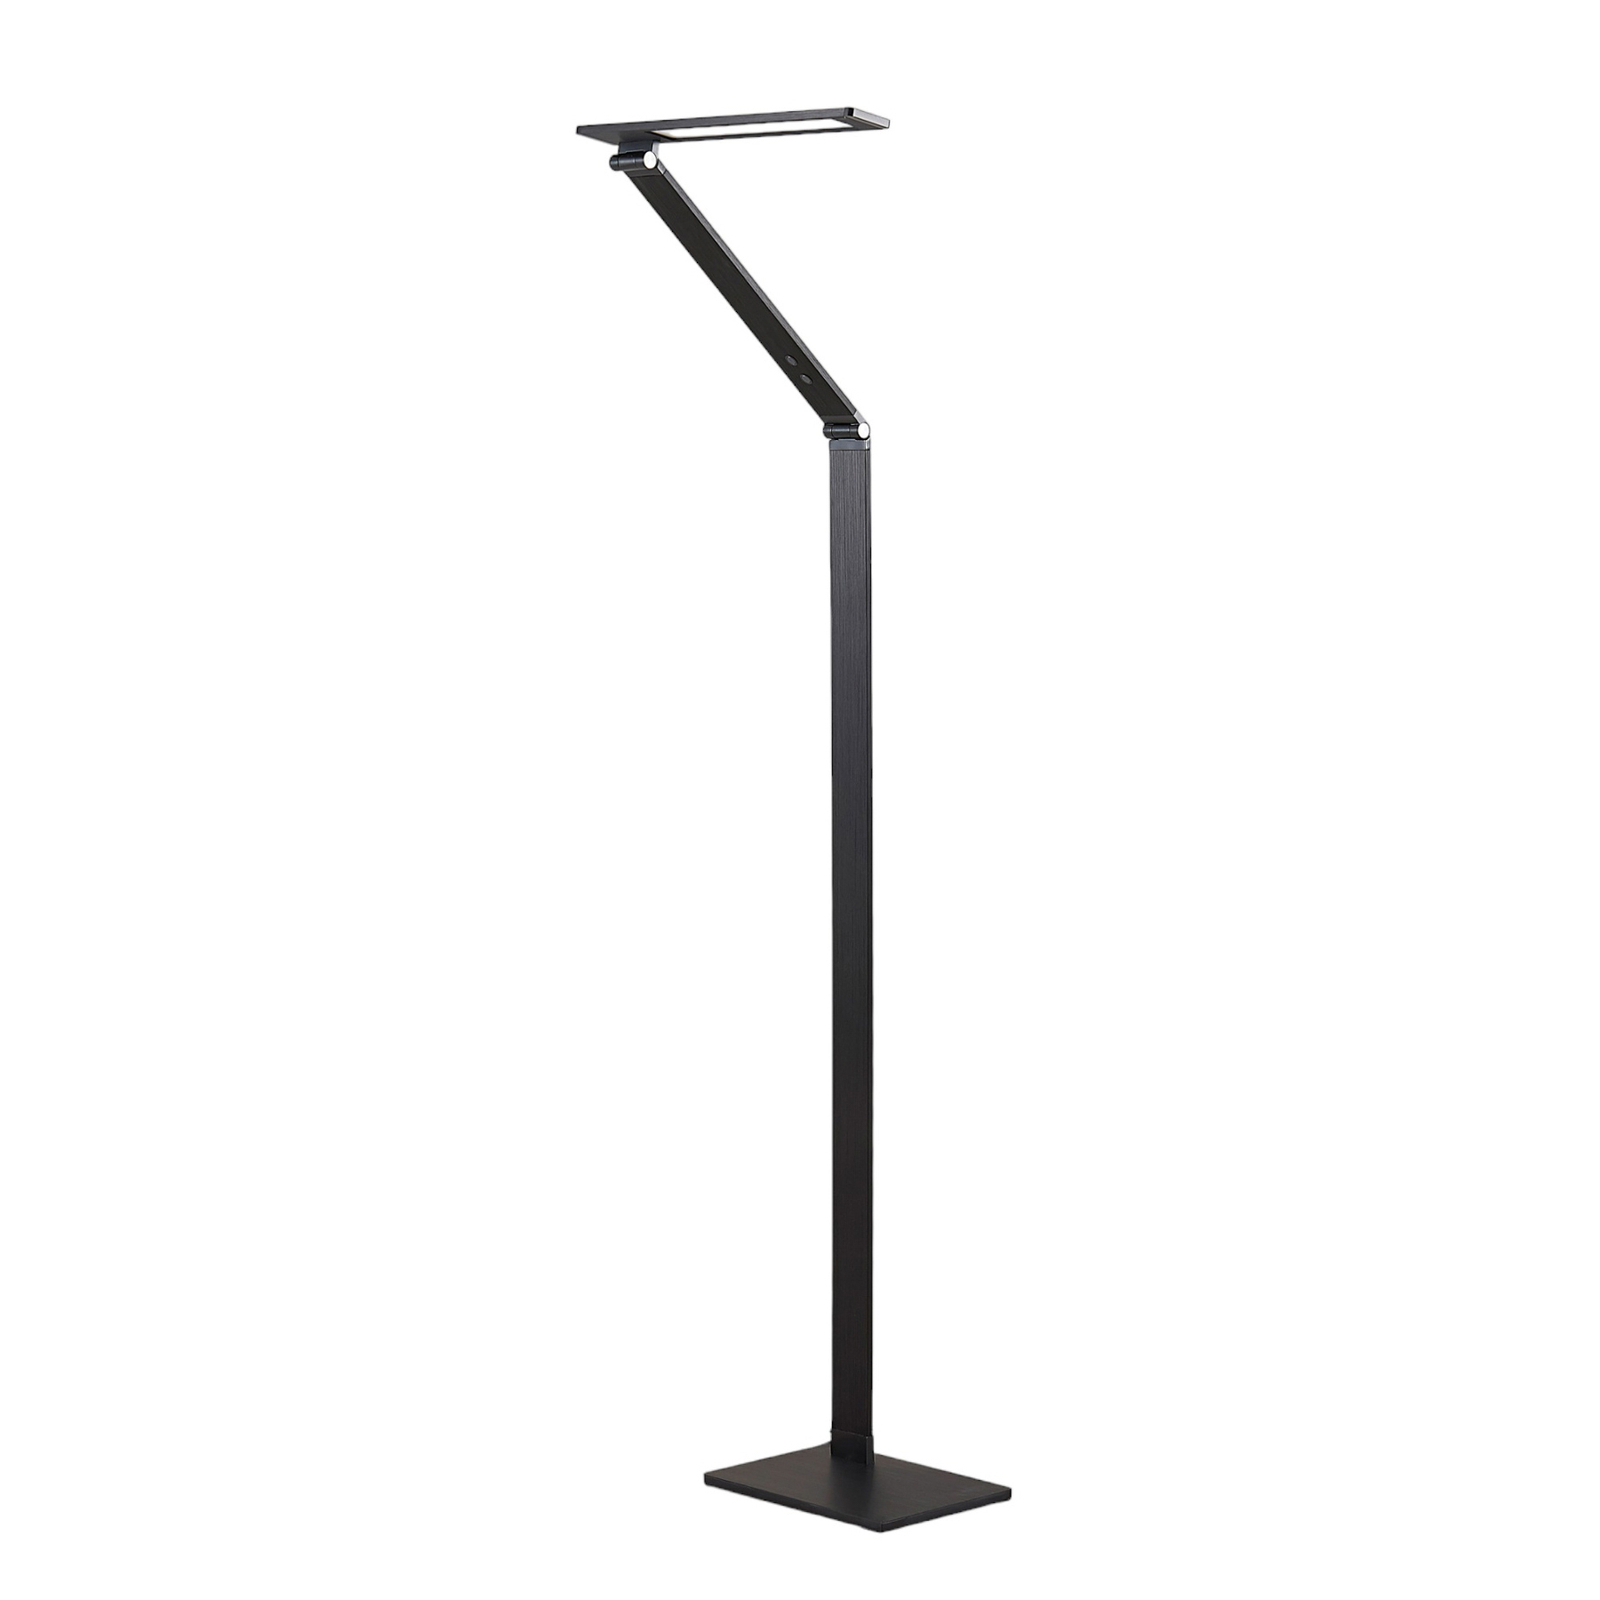 Lampadaire LED Salome dimmable, couleur variable